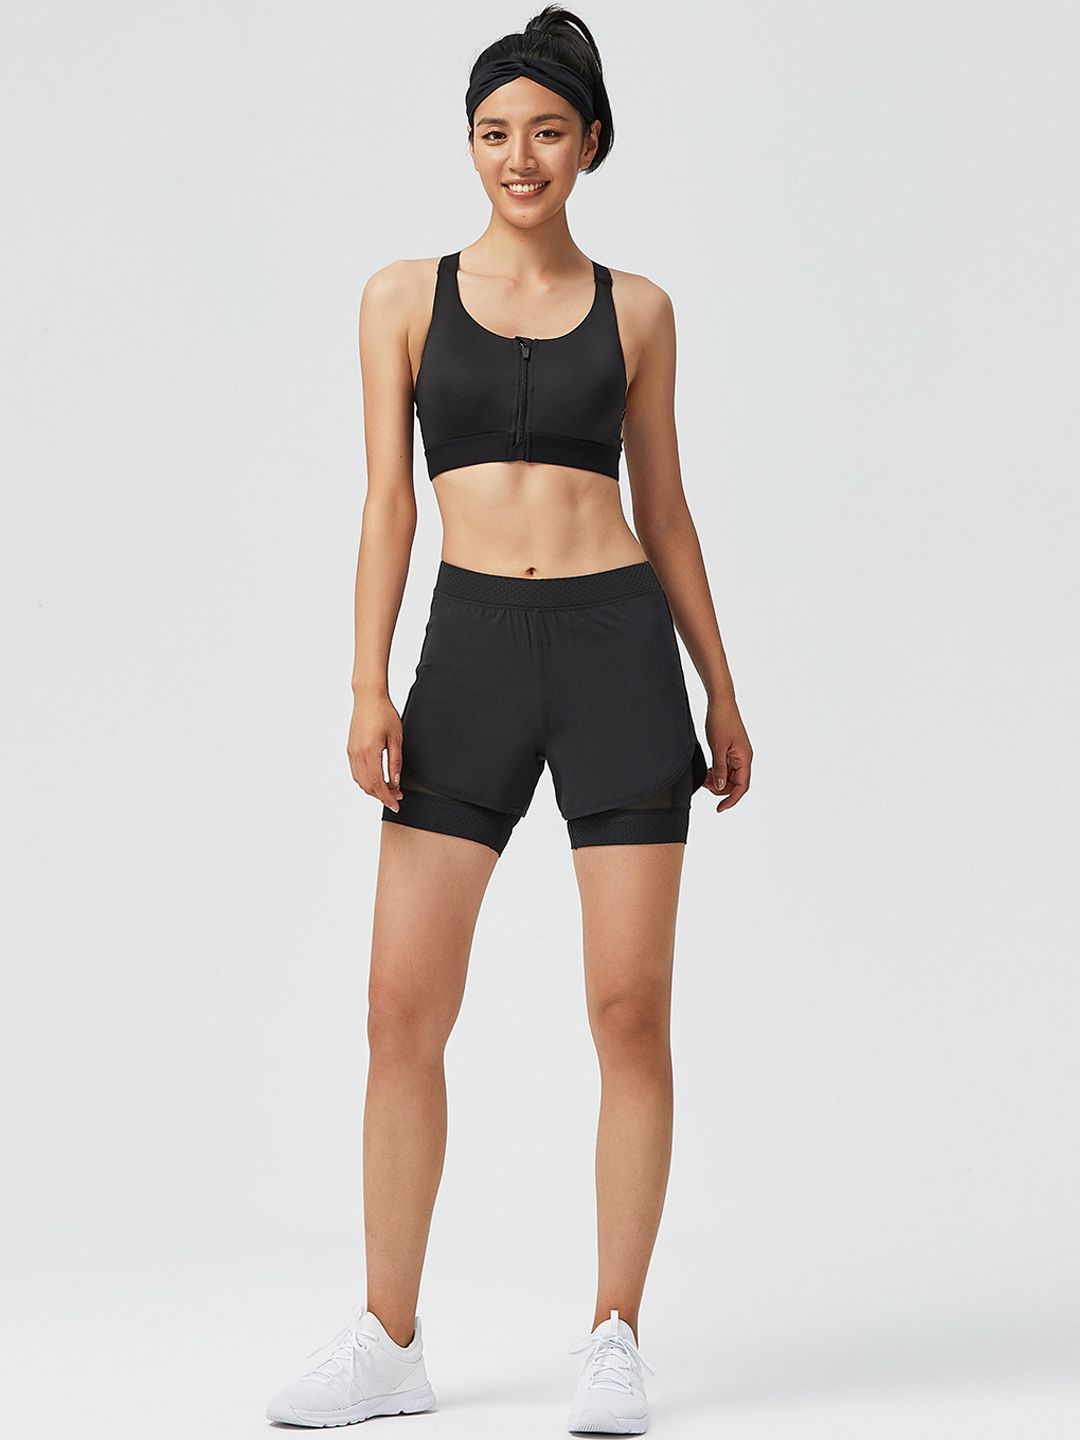 Domyos By Decathlon Women Black Training or Gym Hot Pants Shorts Price in  India, Full Specifications & Offers